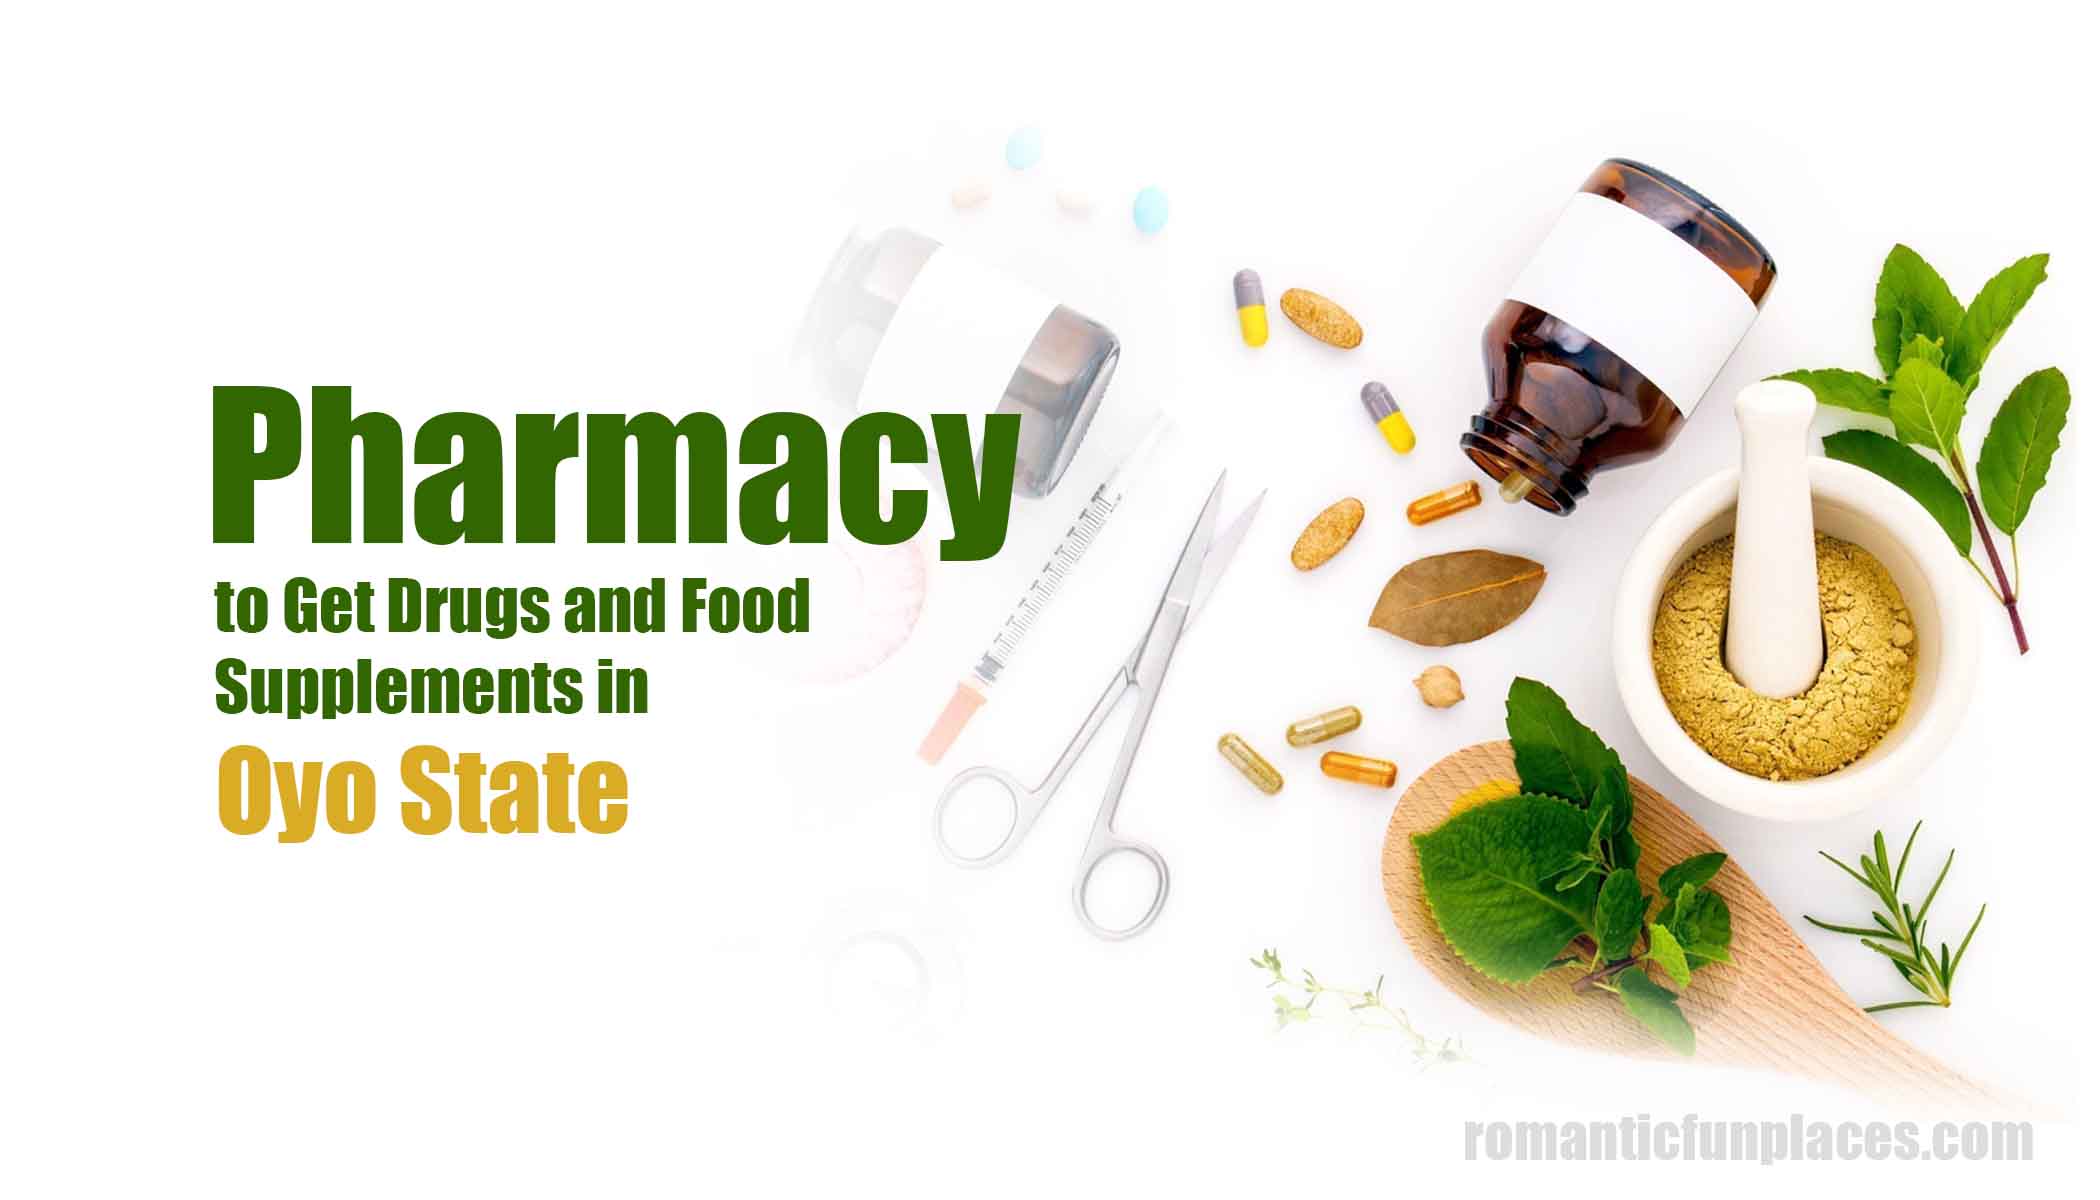 Pharmacy to Get Drugs and Food Supplements in Oyo State